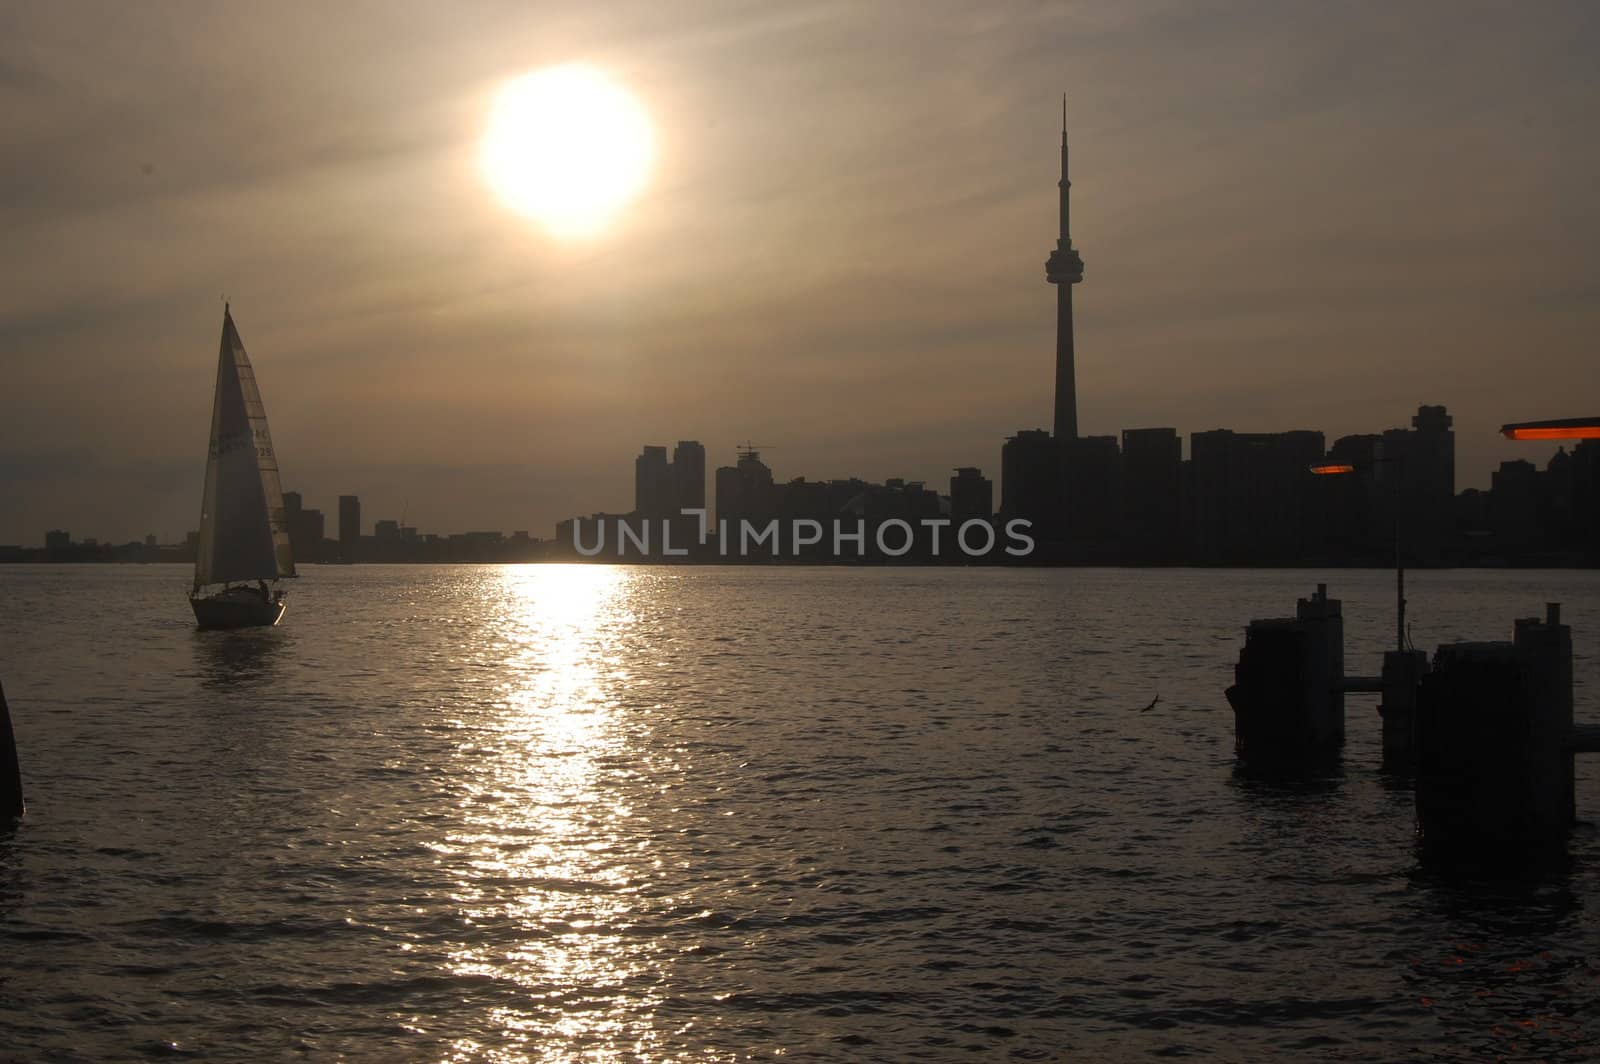 This sunset view of the Toronto skyline was photographed from the Toronto Islands.